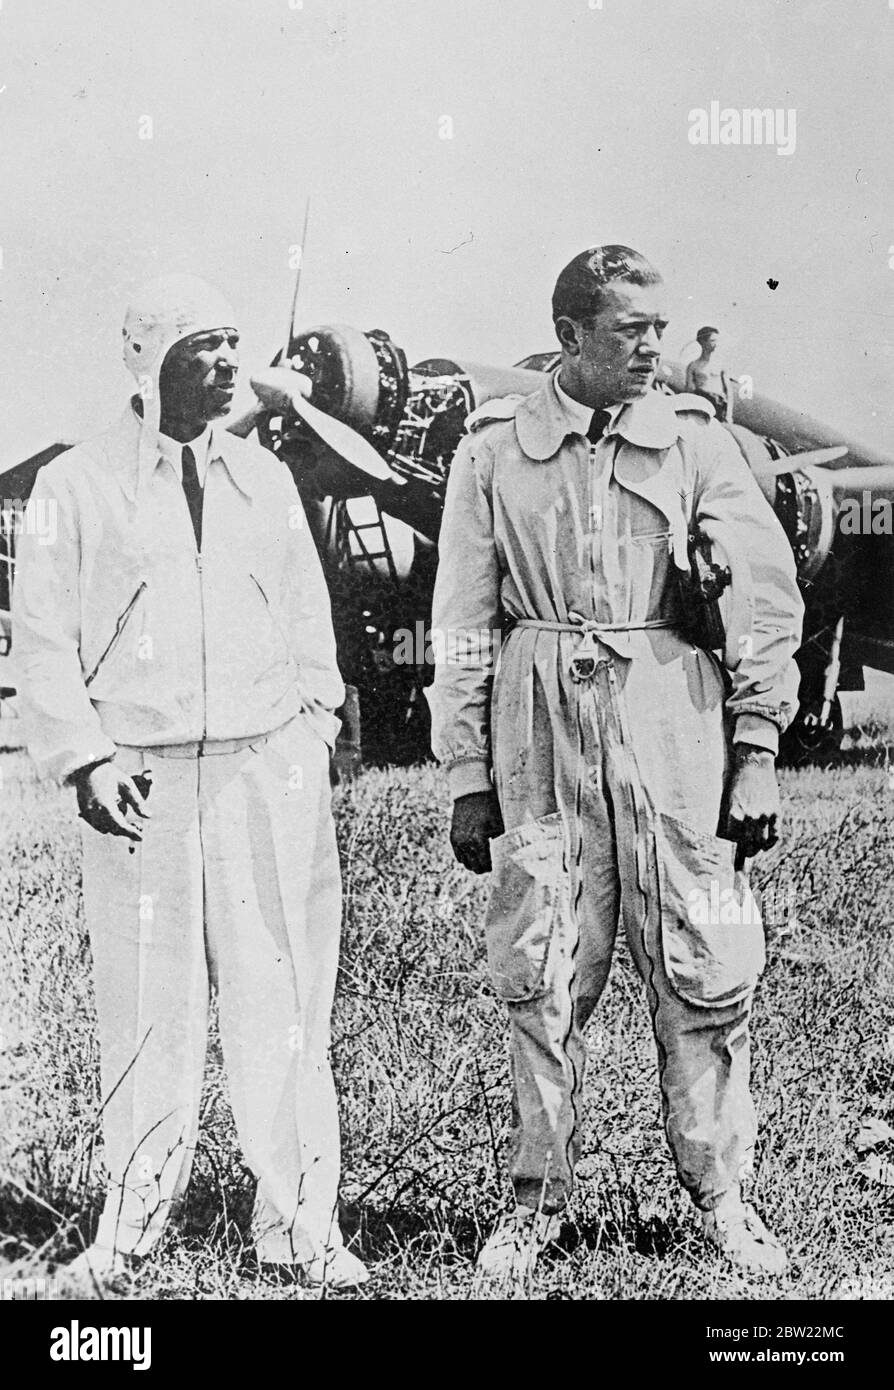 Bruno Mussolini (right) with captain Biseo. It is authoritatively learned in Rome that Bruno Mussolini 20-year-old son of the Duce and miscellaneous personal pilot of fighting in staying. Their base is at Majorca, with other Italian MS they took out 18 of Italy's finest bombing machine. 6 October 1937. Stock Photo